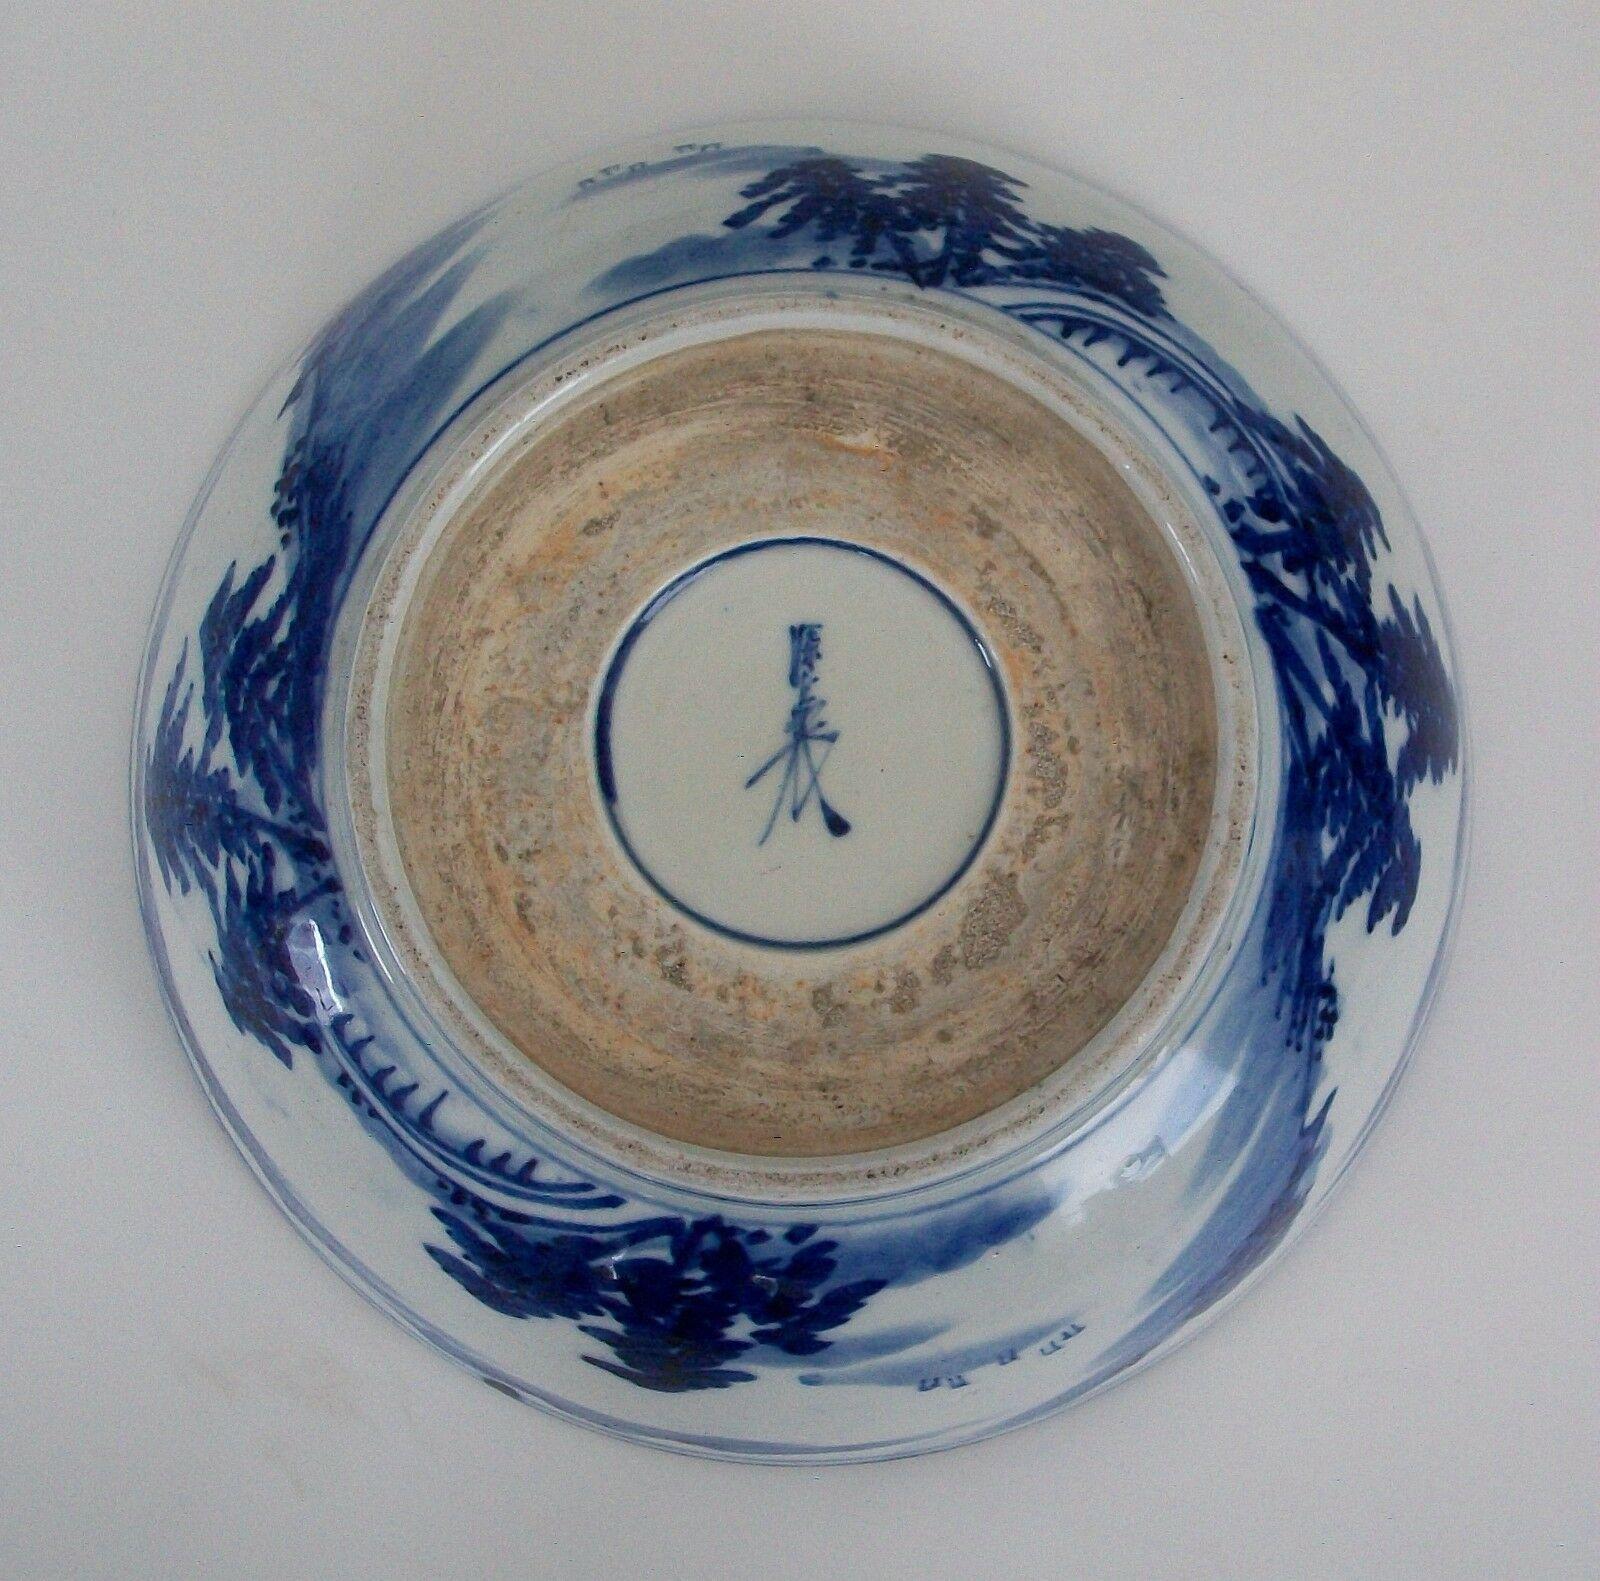 Ceramic Vintage Blue & White Bowl, Hand Painted, Signed, Japan, Mid 20th Century For Sale